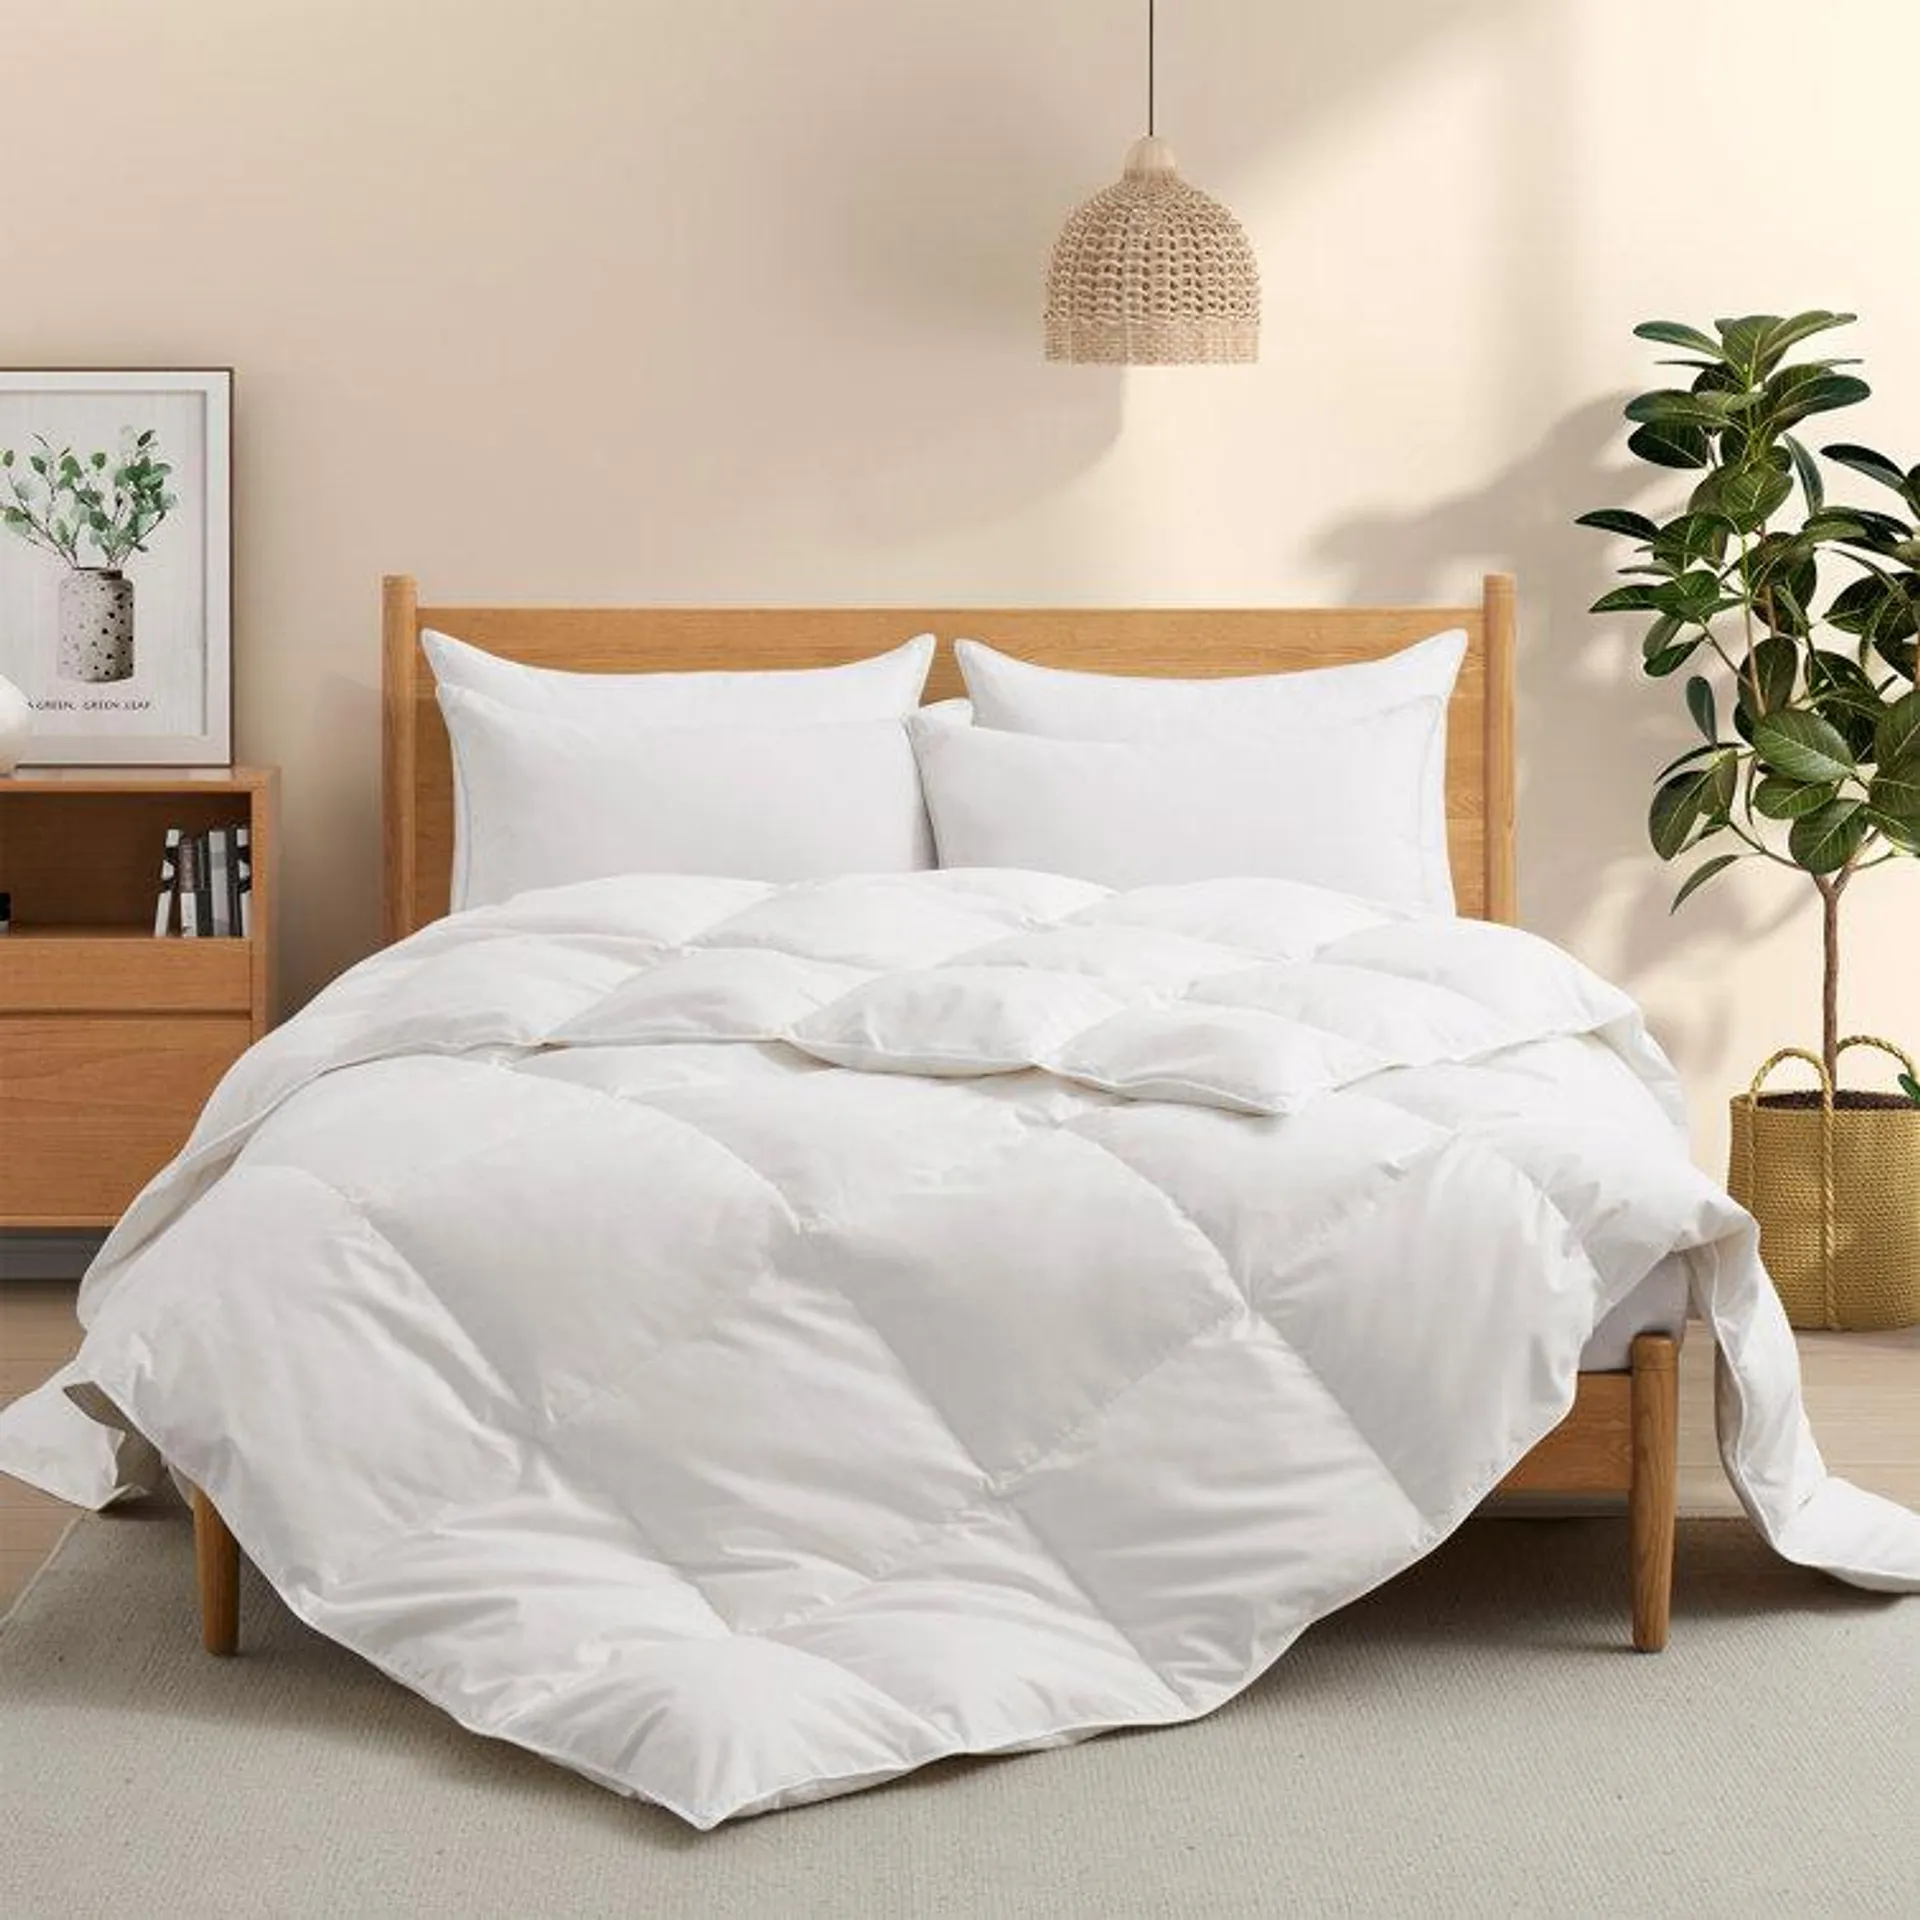 600In³/Oz Fill Power All Season Down & Feather Blend Comforter